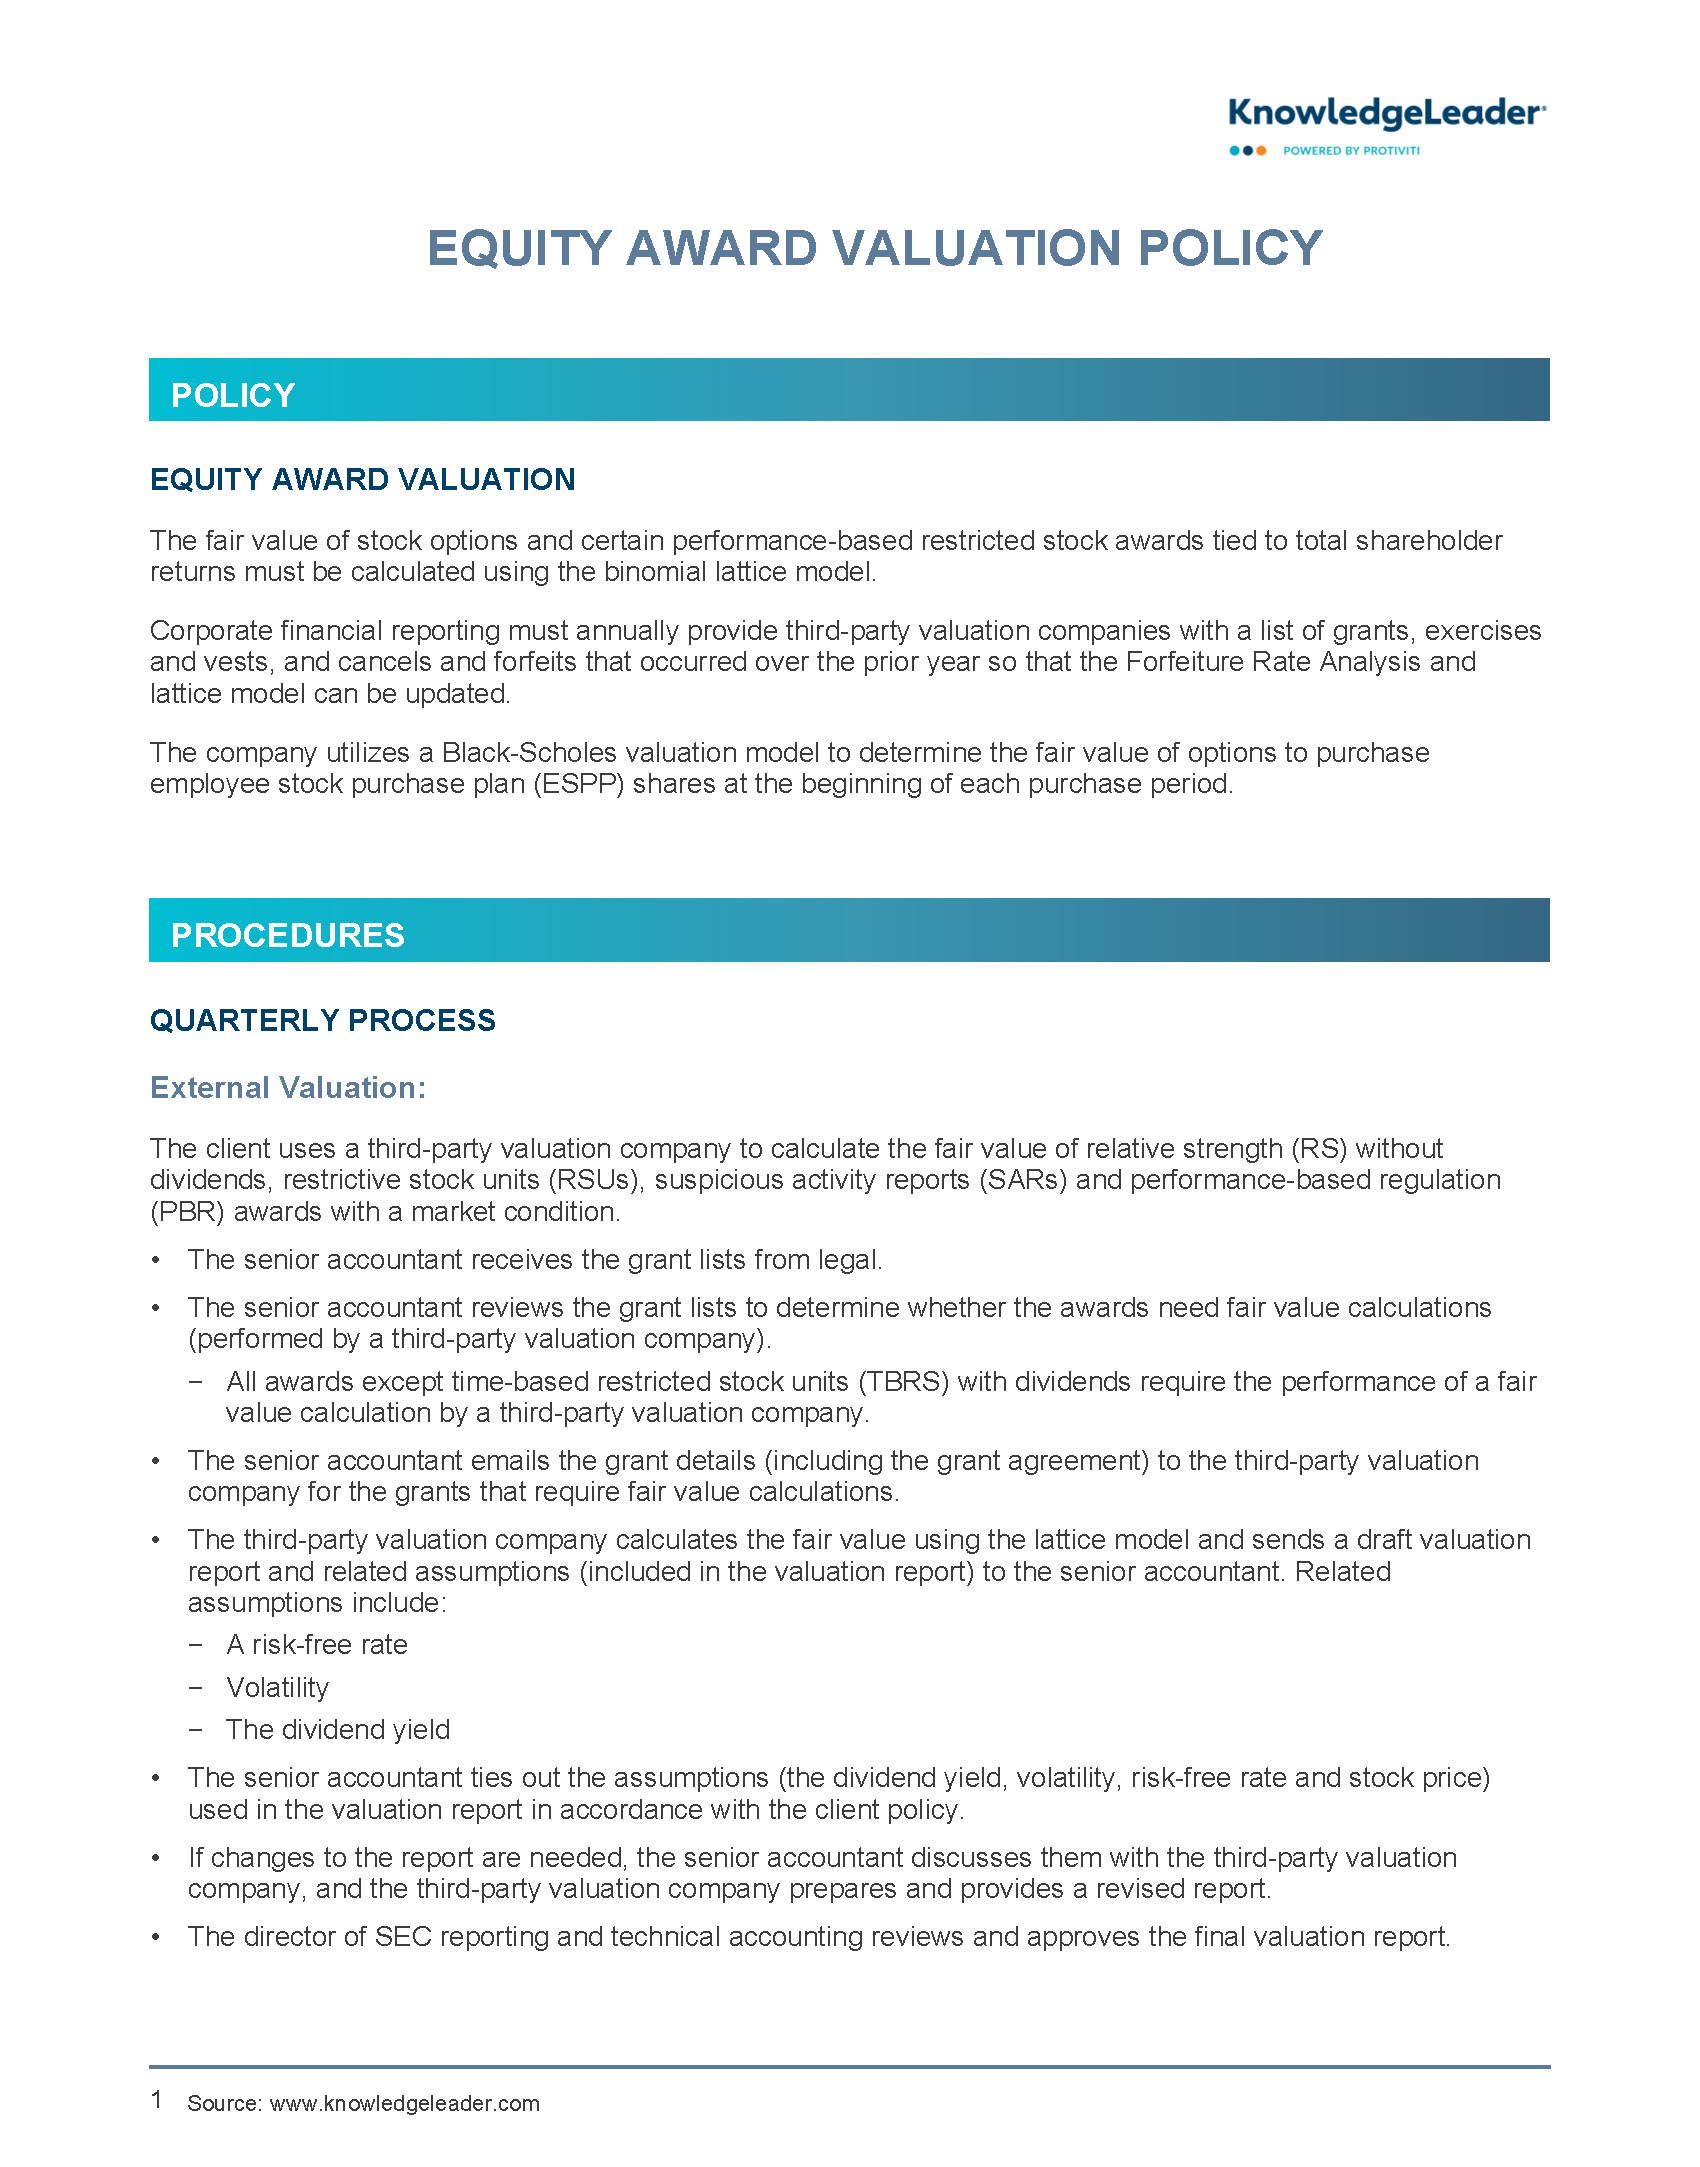 Screenshot of the first page of Equity Award Valuation Policy